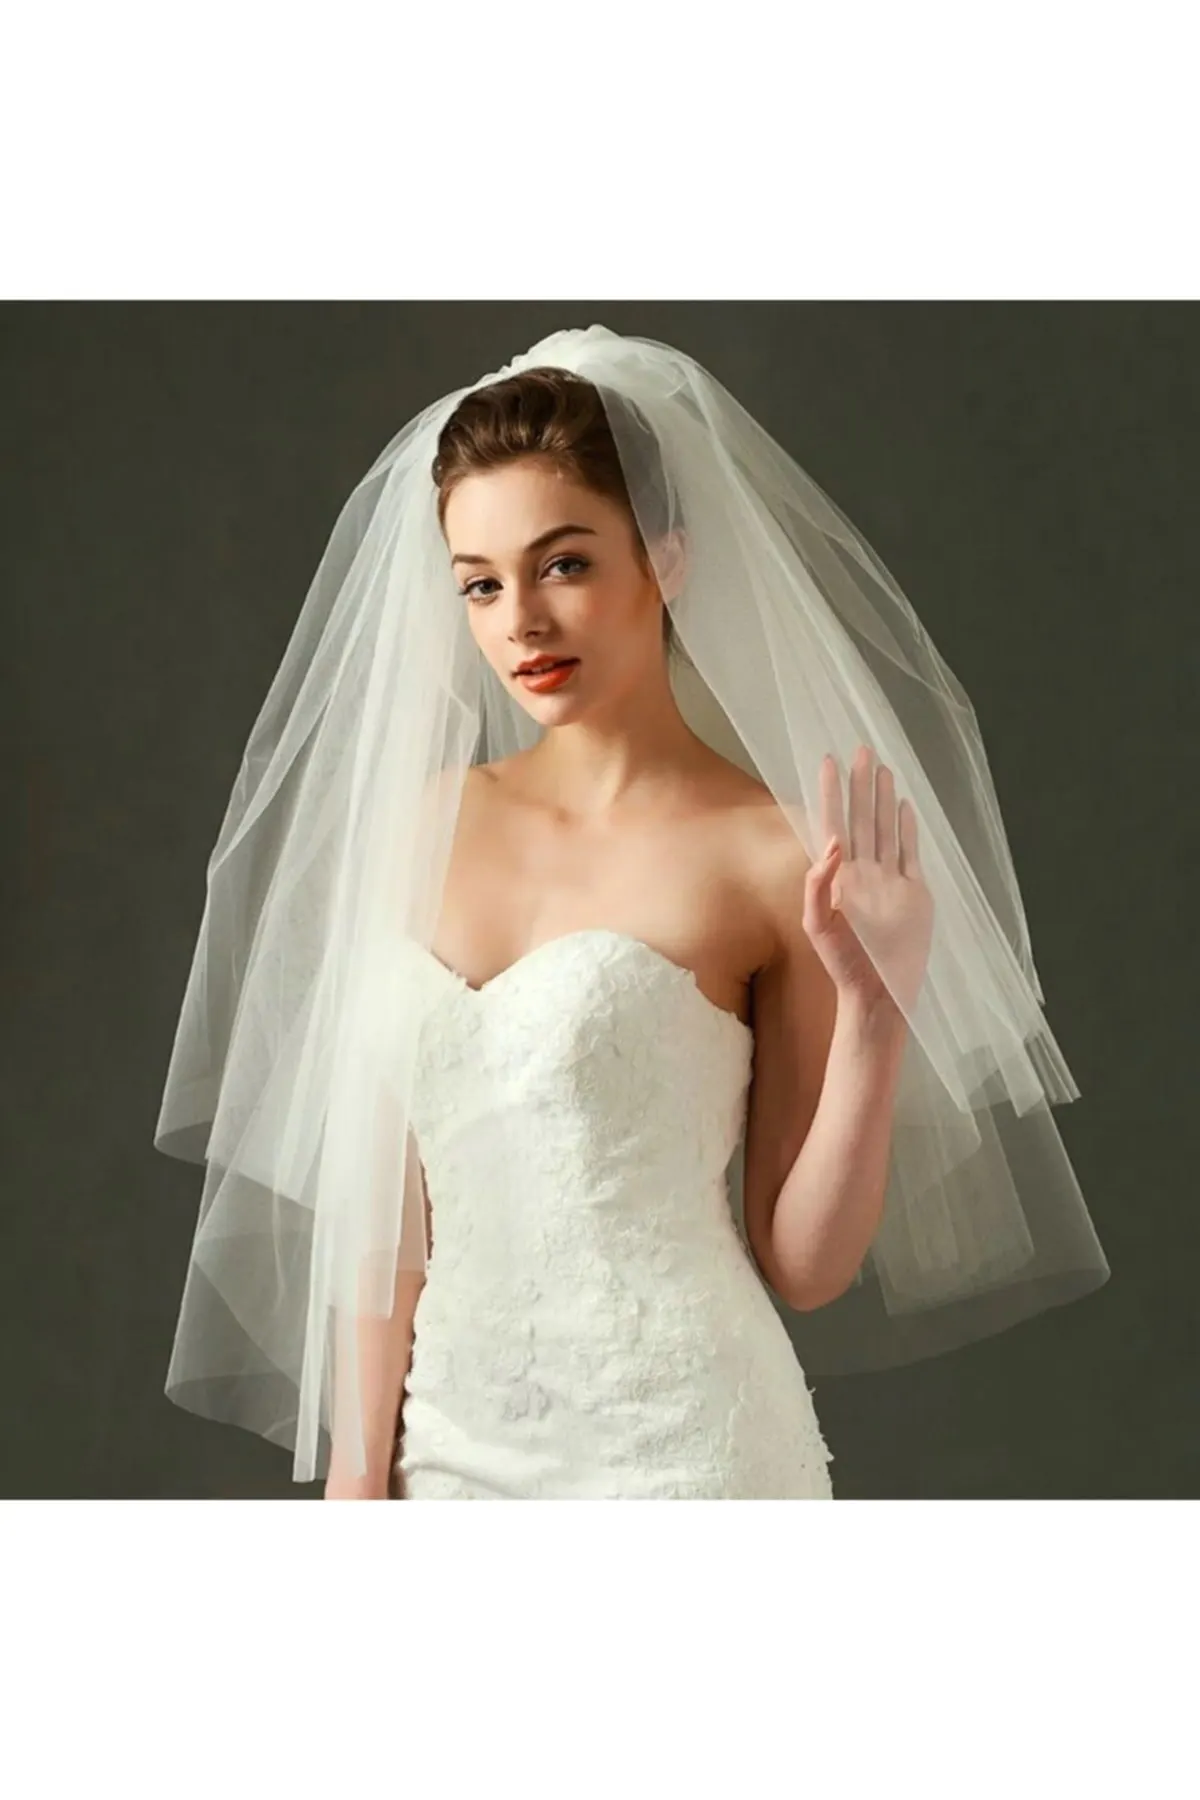 

Bridal Accessories Ecru Color Suitable For All Wedding Dresses 75 Cm 2 Layer Tulle Veil Wedding For Bride And Bridesmaids